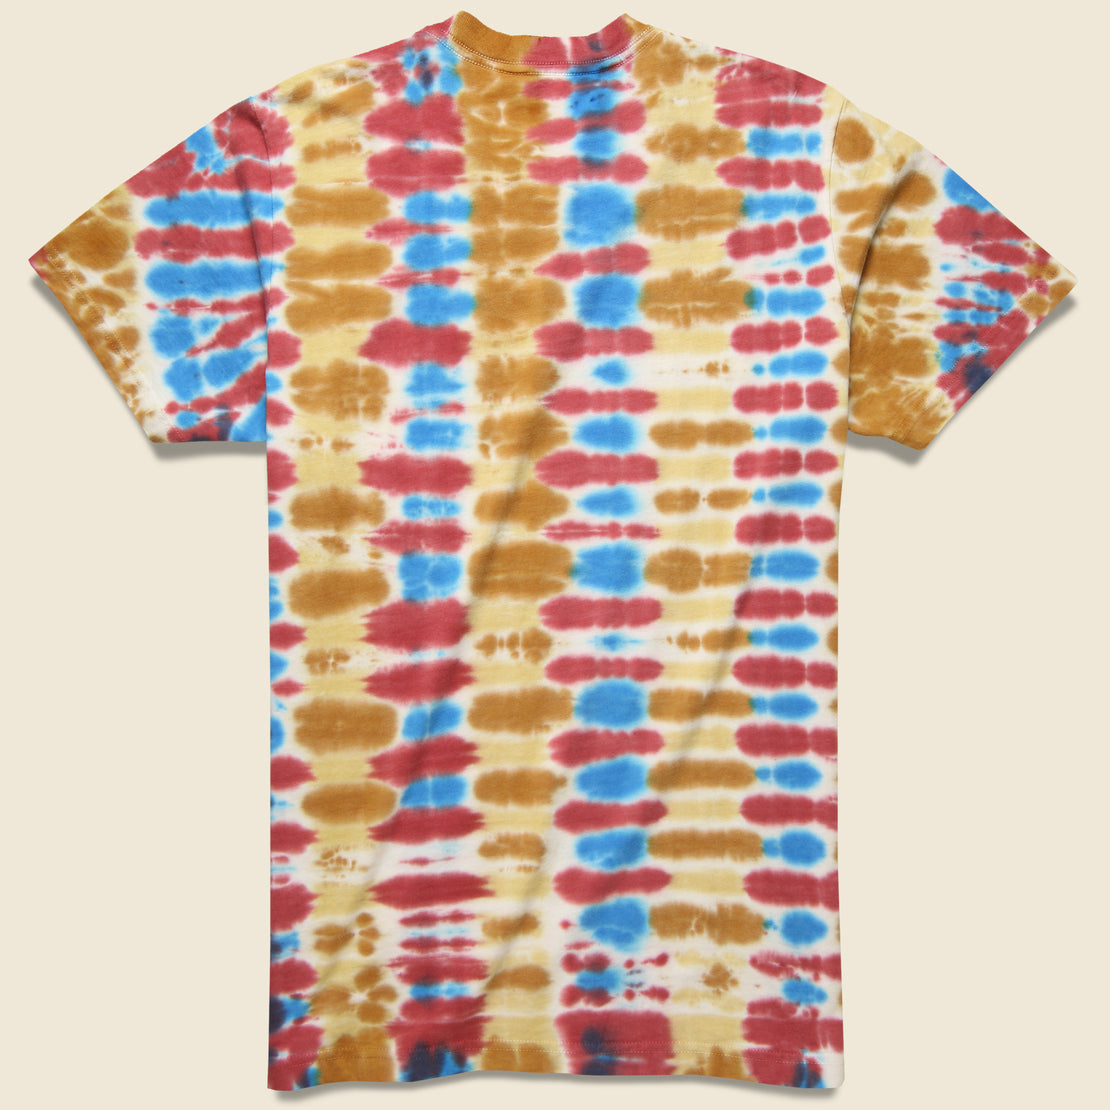 Pocket Tee - Parallel Tie Dye - Battenwear - STAG Provisions - Tops - S/S Tee